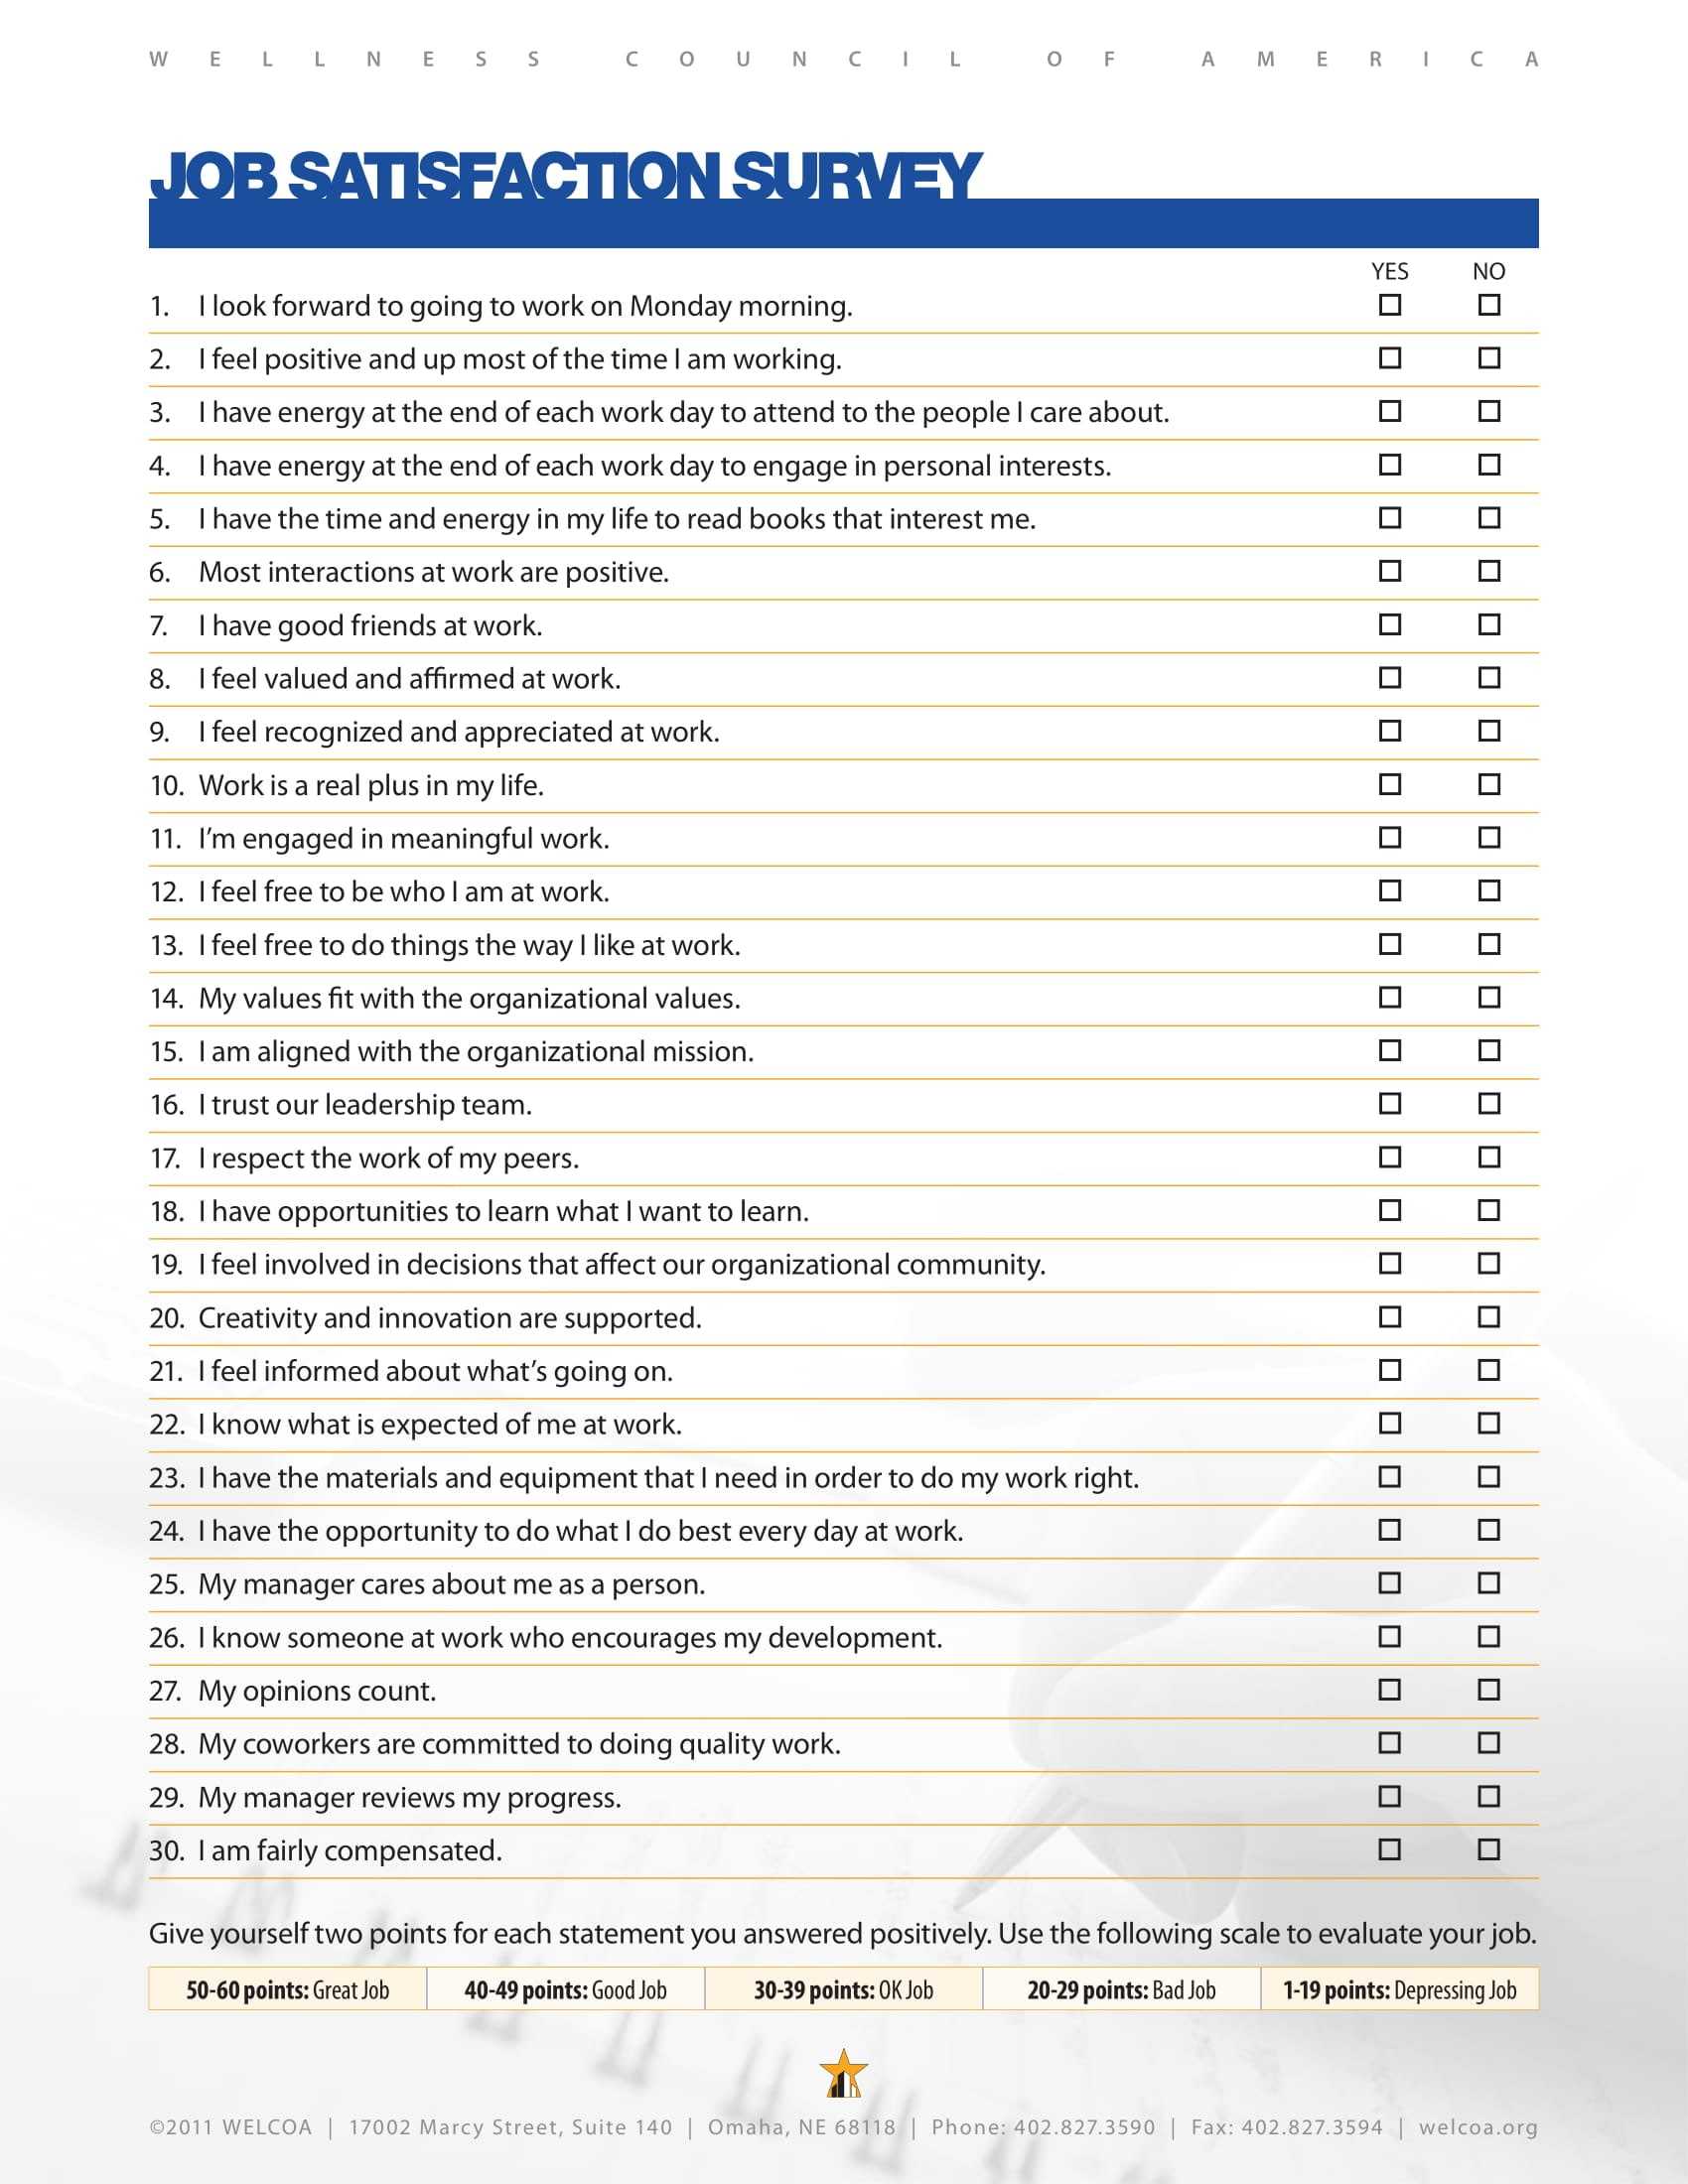 14+ Employee Satisfaction Survey Form Examples - Pdf, Doc Throughout Employee Satisfaction Survey Template Word